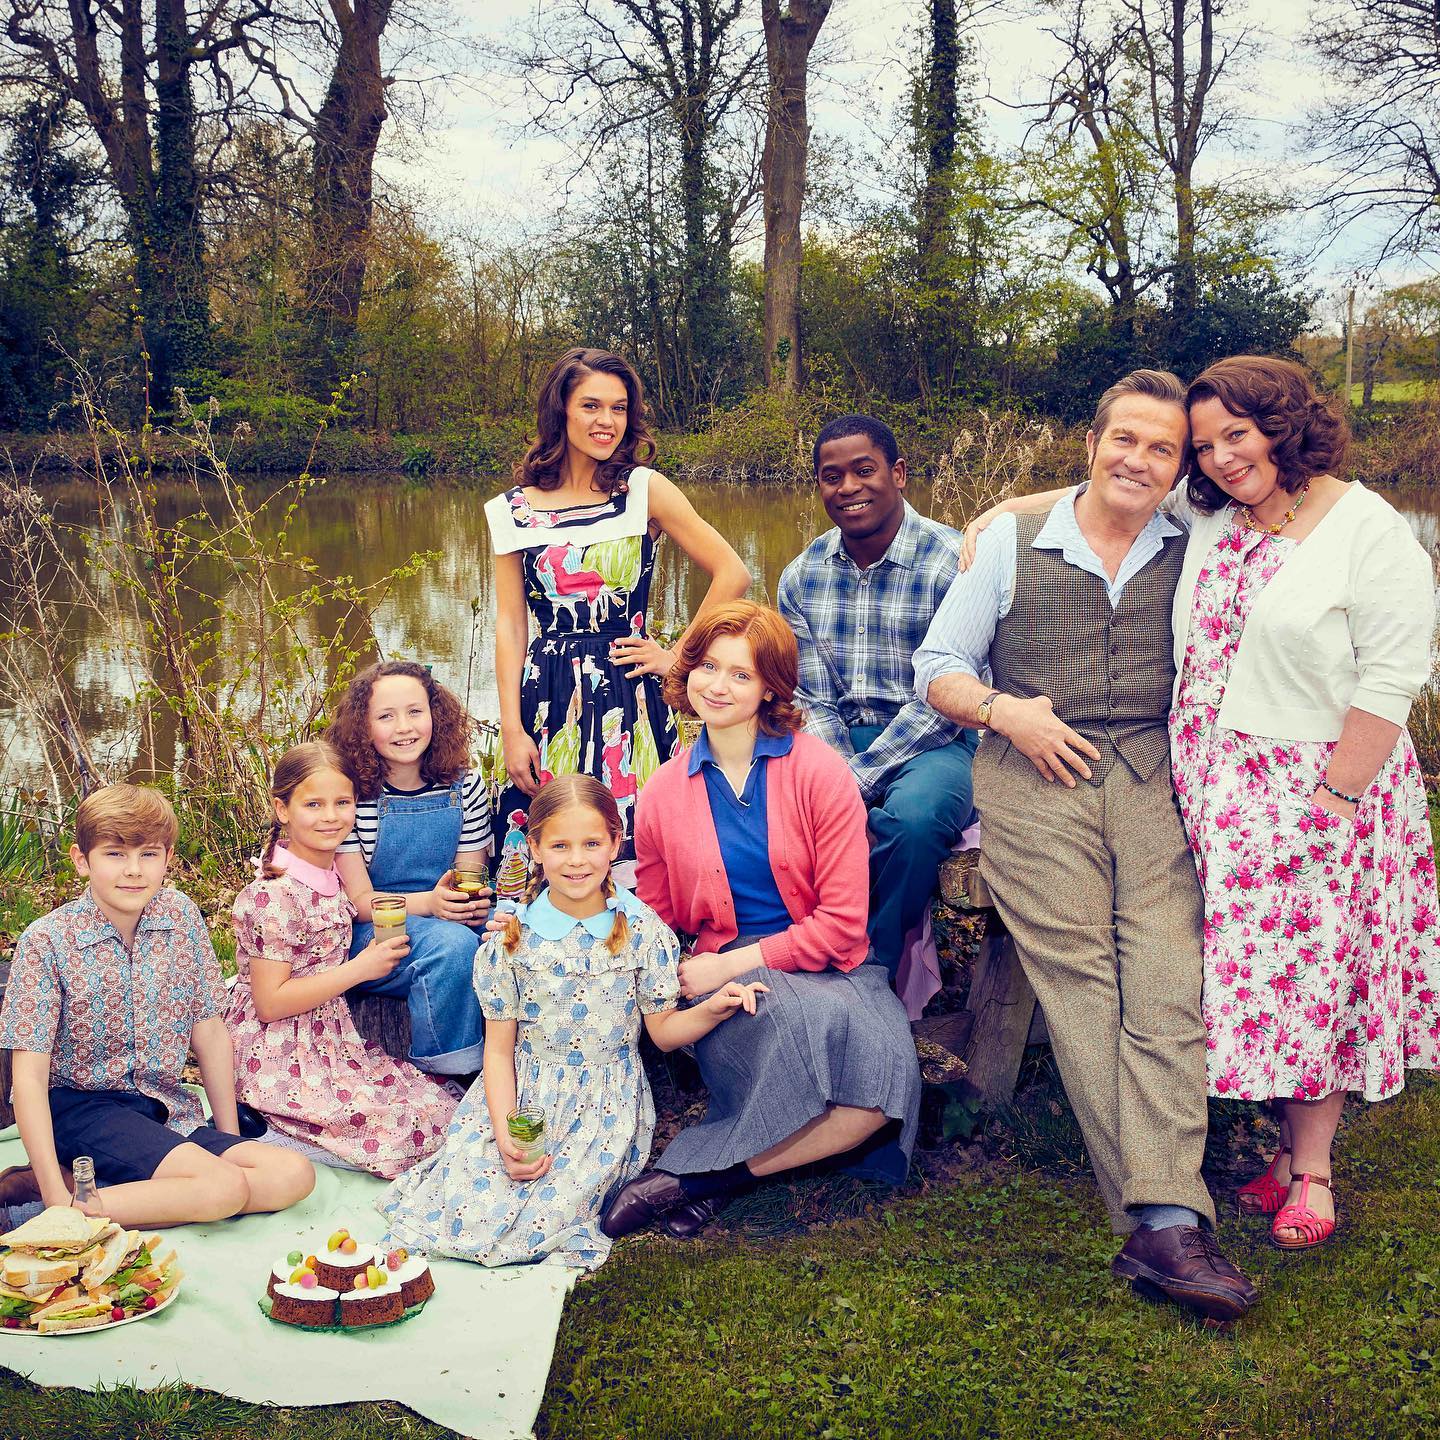 Autumn nights are upon us! Tune into ITV1 tonight at 8pm for The Larkins starring @bradderswalsh